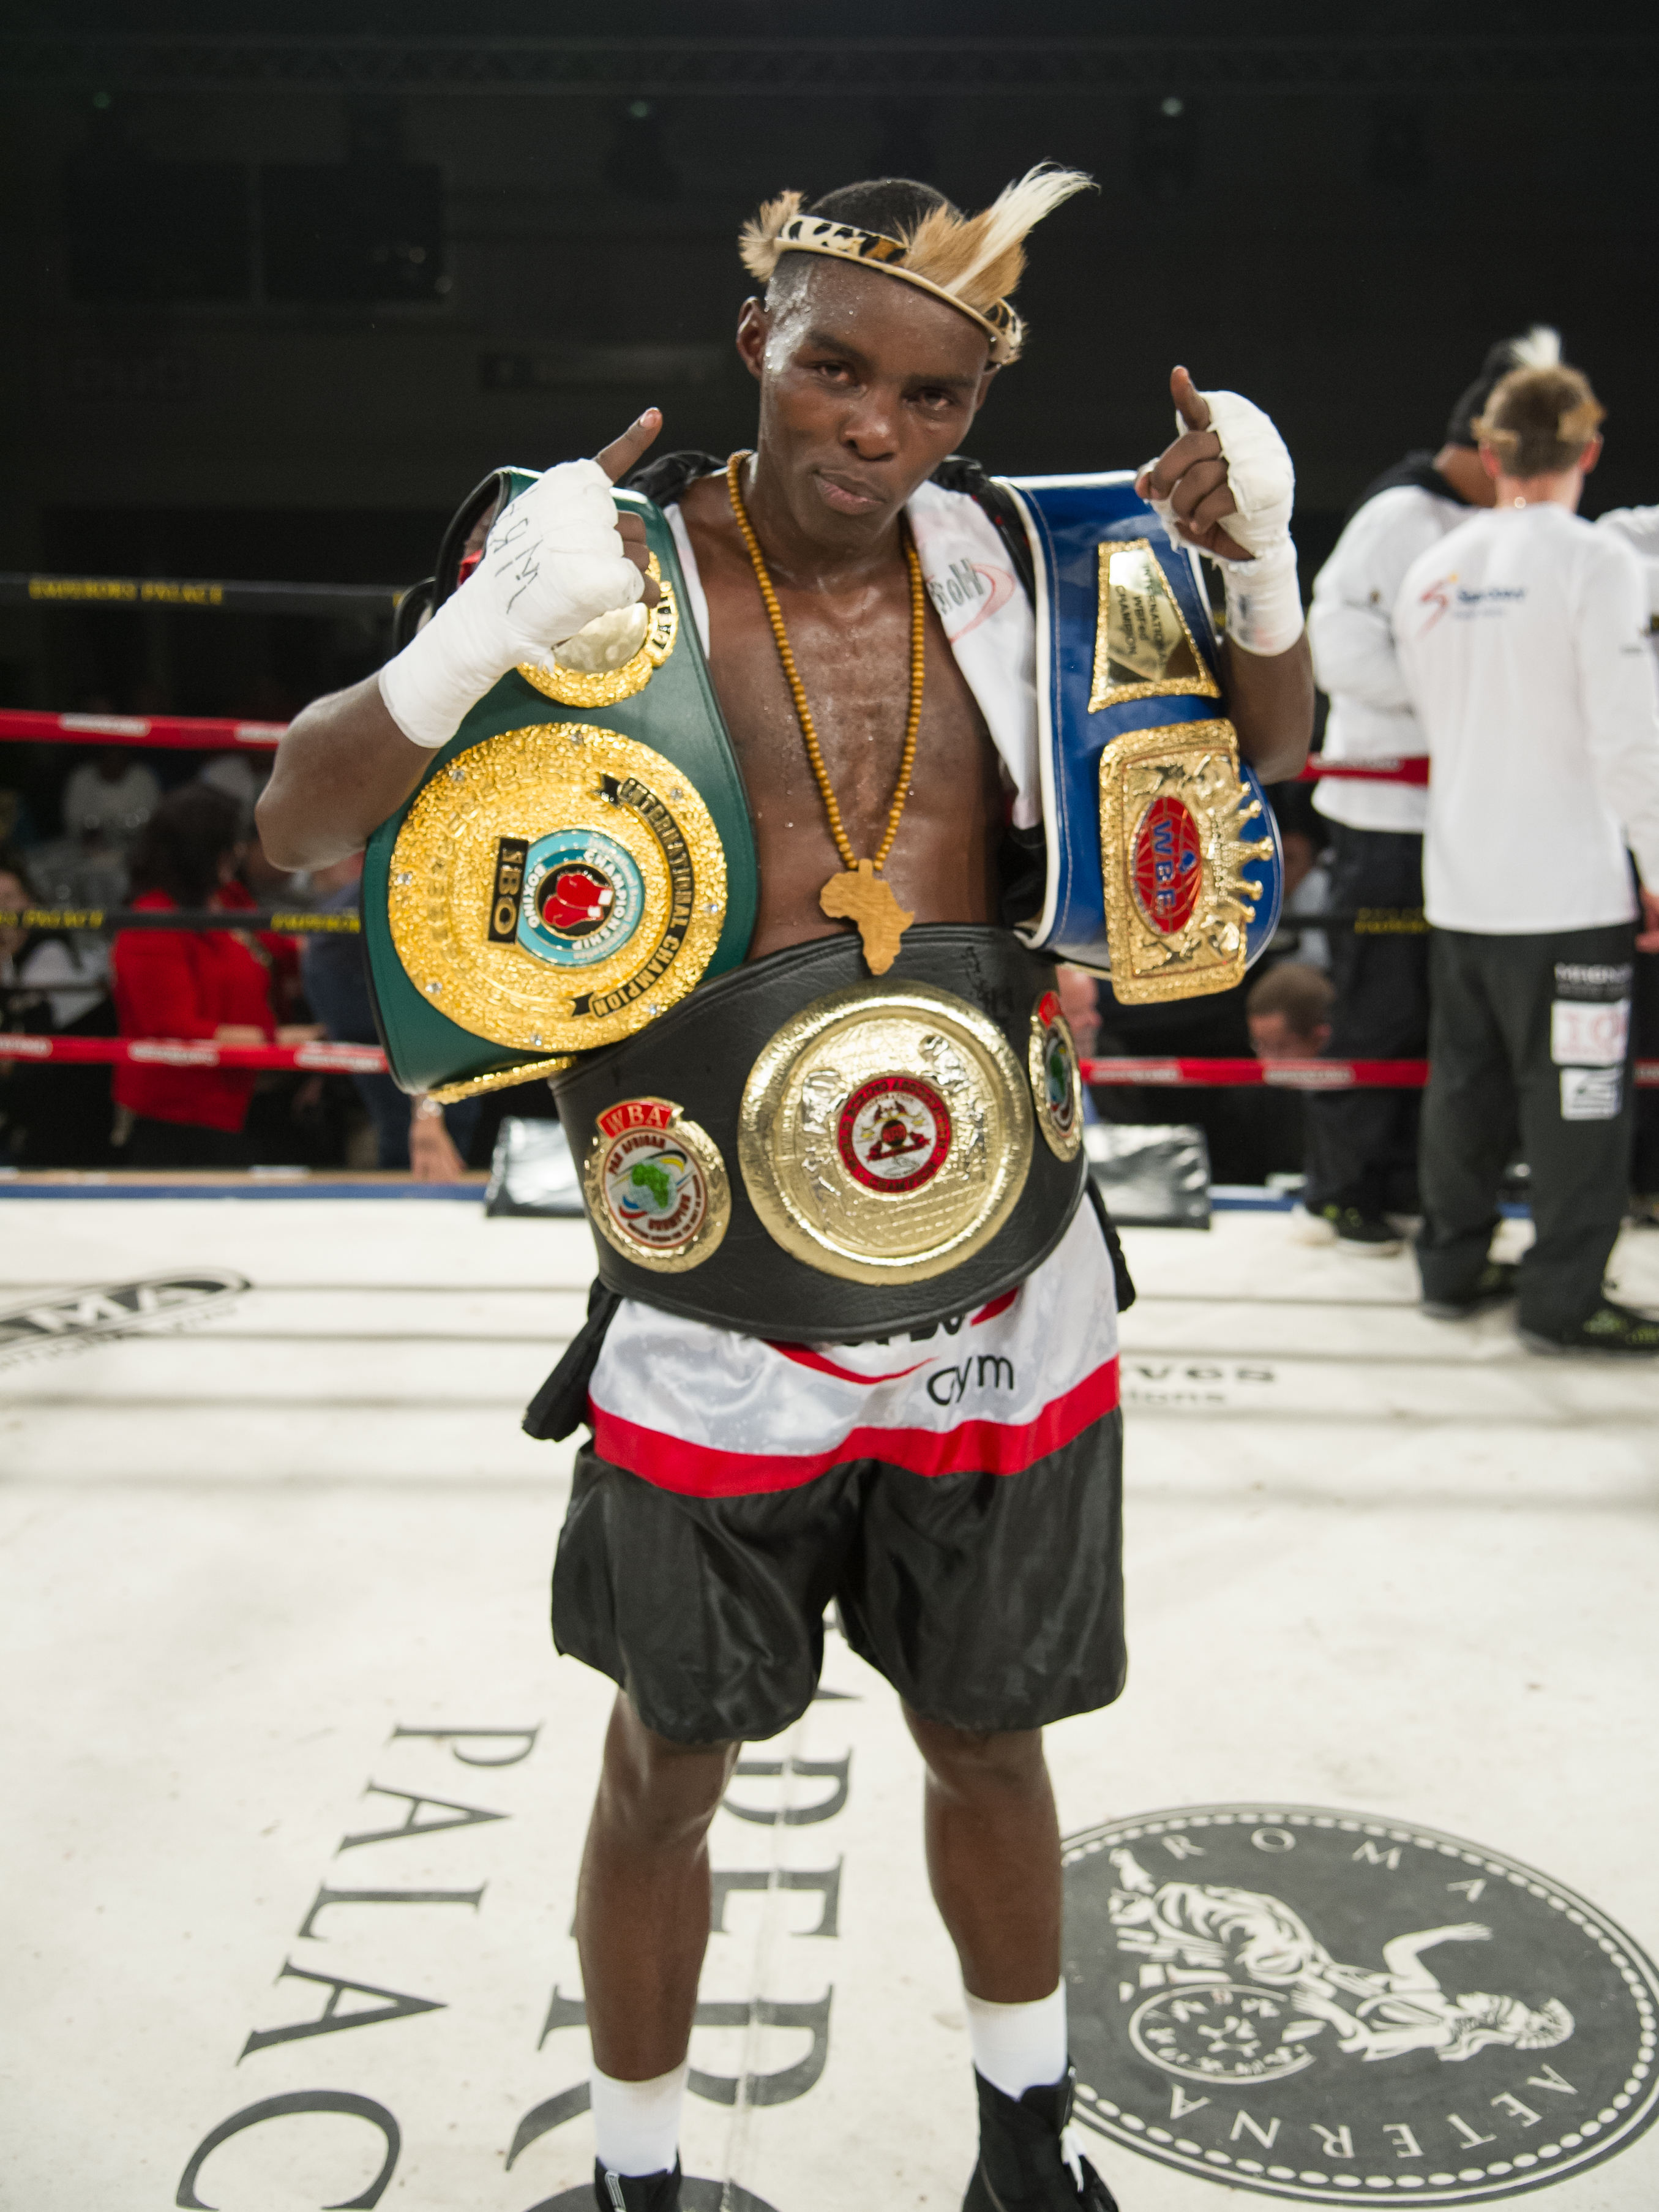 It was nip and tuck all night between Xolisani Ndongeni and Mzonke Fana, with the younger Ndongeni winning a razor-thin majority decision against the veteran former world champion in a scrap for the WBA Pan-African lightweight title – 115-113, 115-113, 114-114. The faster, busier Ndongeni, now unbeaten in 18 fights, just scraped home against the shrewd, sassy Fana. It was like a chess match between two contrasting styles: the unorthodoxy and youth of Ndongeni against the wiles and skills of the proud ex-champion. After an electric start, Ndongeni settled into an easy rhythm, but the trouble was he never quite asserted himself. He was over cautious and boxed within himself, presumably because he gave Fana too much respect. Even at 41 and with his best years behind him, Fana was in marvellous shape and fought with great ambition. Although he threw many punches, Ndongeni’s movement made him a difficult target and he either rode or avoided the many shots that came his way. It was a tremendous win for Ndongeni, his best to date, and he will have learned many important lessons. Perhaps the most significant moment of all came in the minutes after the fight as Fana warmly embraced and joked with his younger rival. It seemed like a symbolic passing of the baton from a proud old warrior to a proud younger one - D-DAY AT THE PALACE was promoted by Golden Gloves Boxing Promotions and was hosted by Emperors Palace, 6 June 2015.